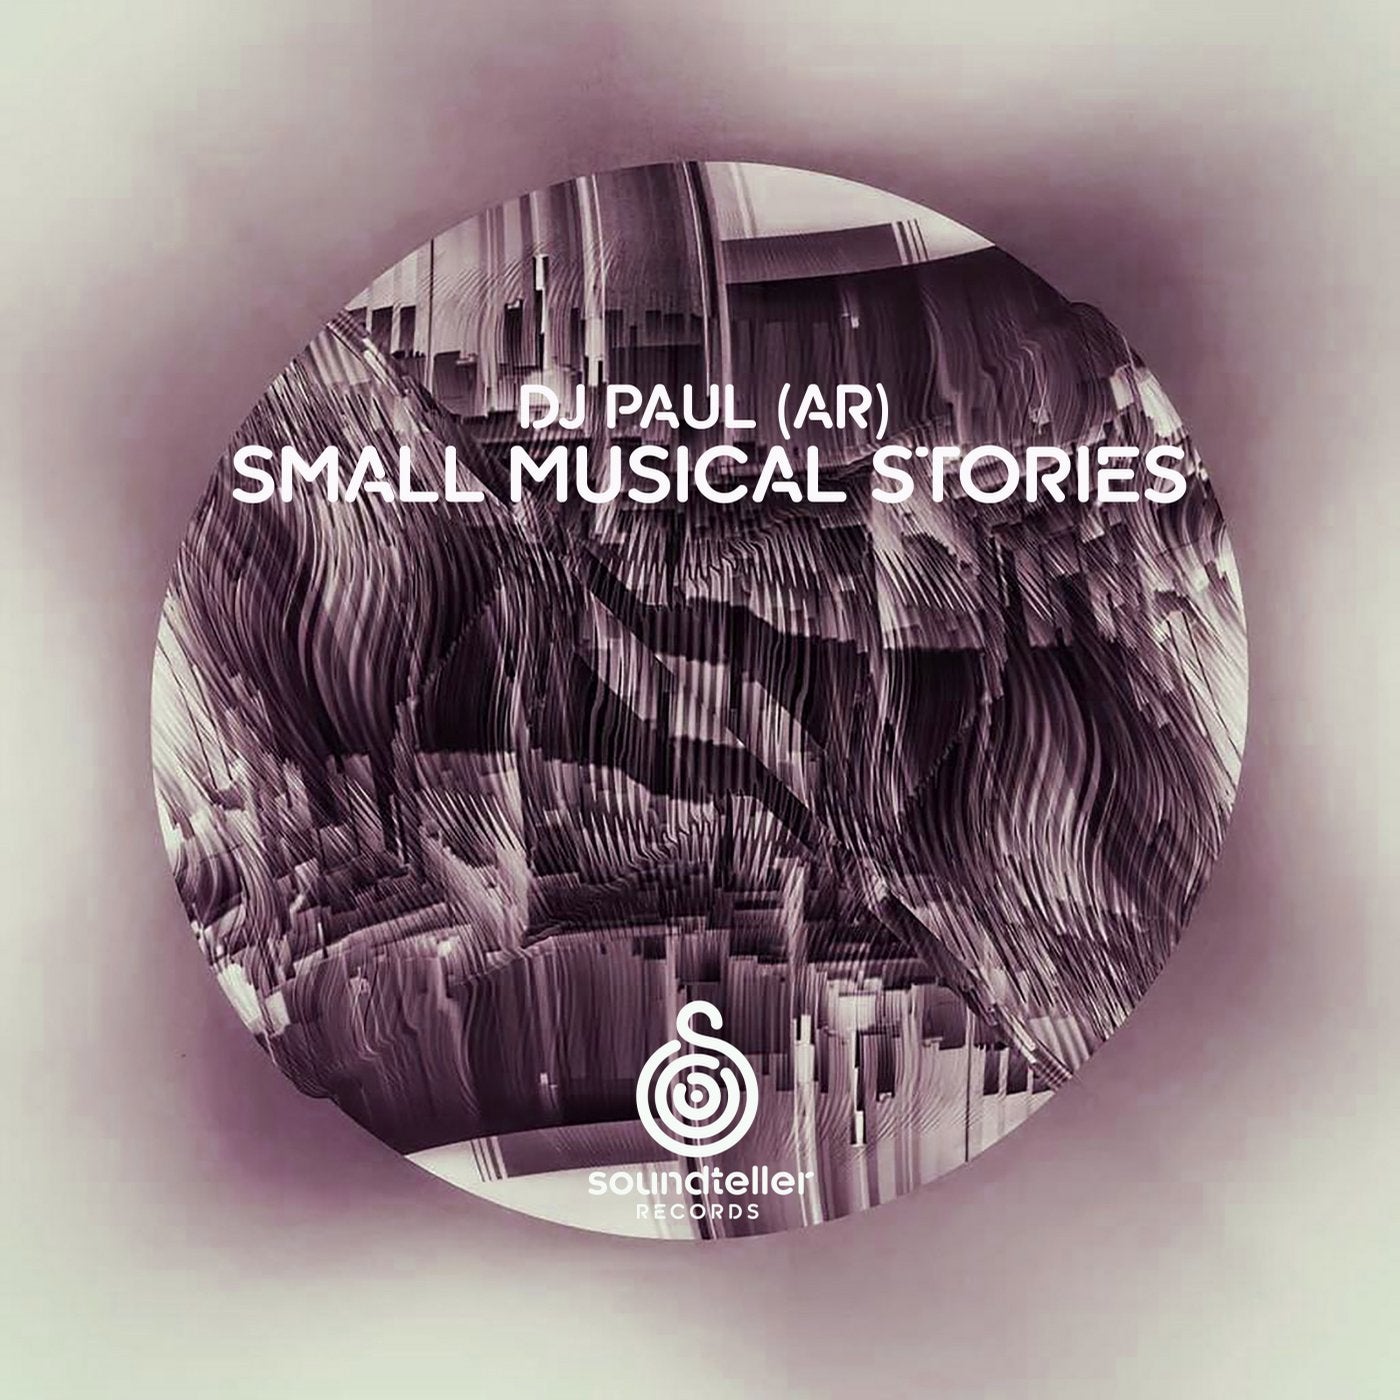 Small Musical Stories